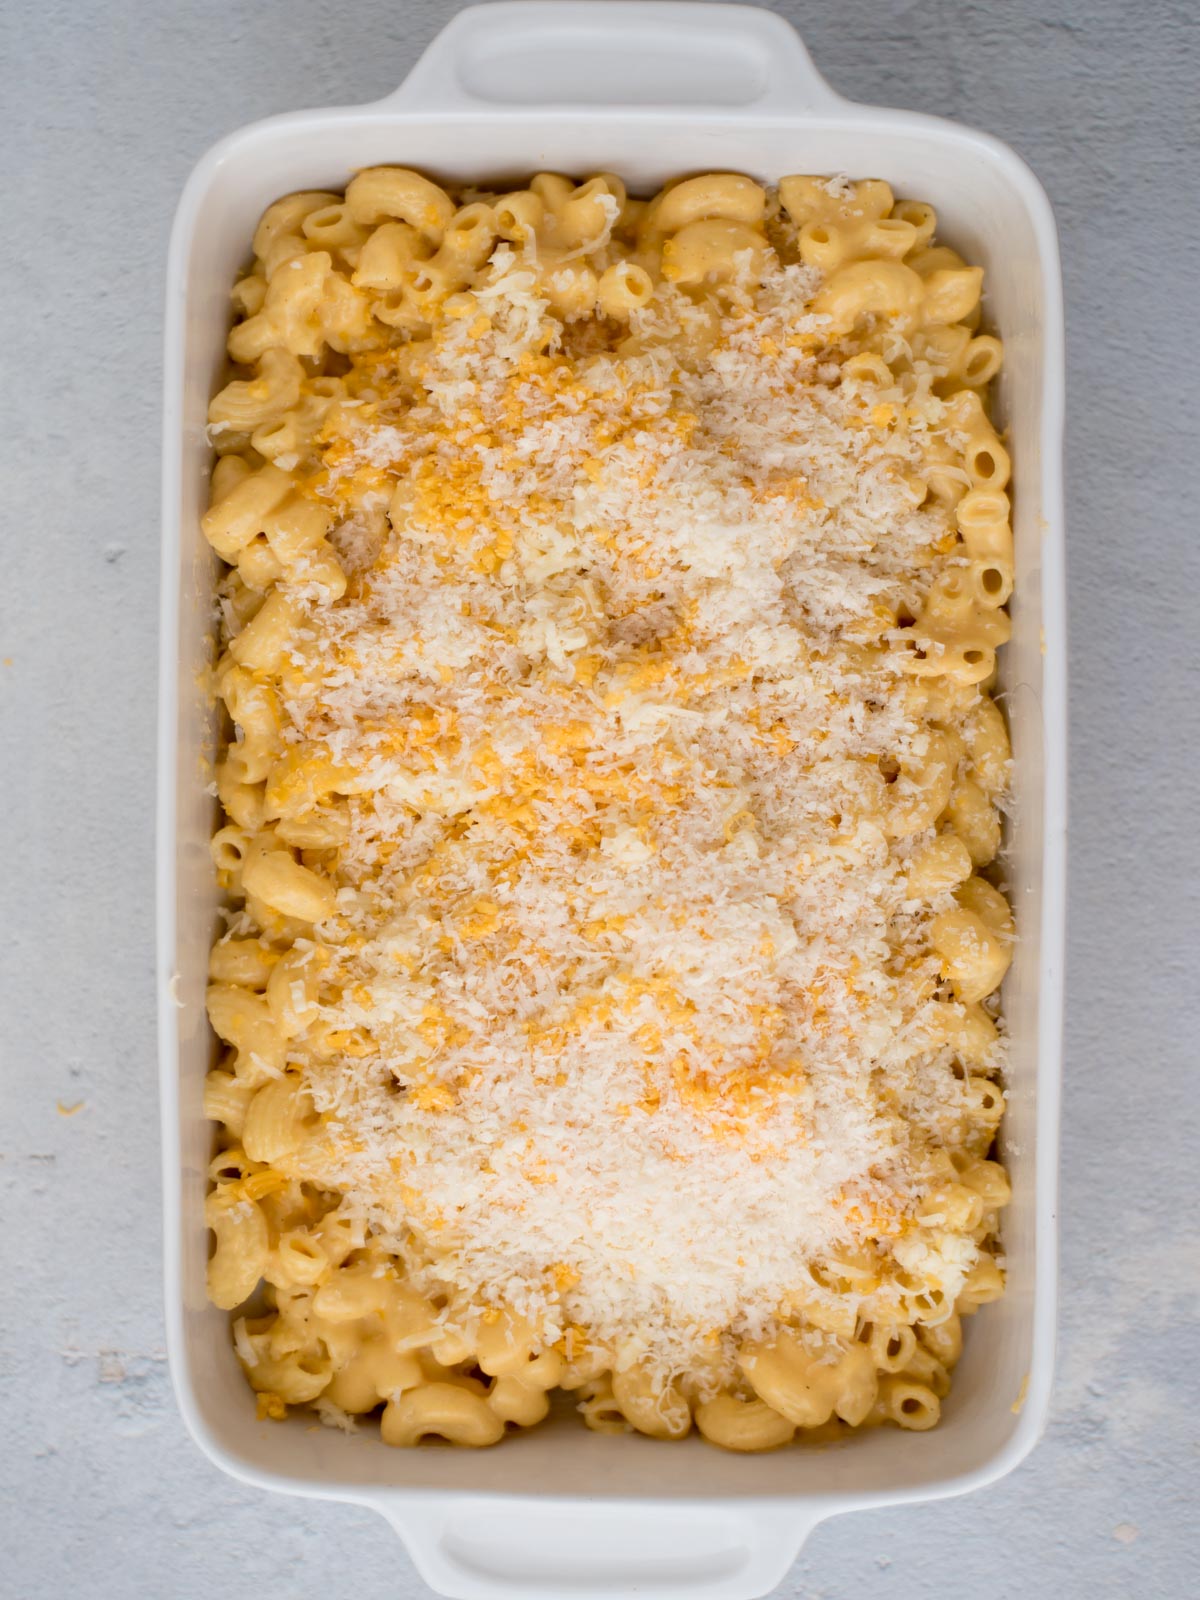 Mac and cheese in a baking dish with shredded cheese sprinkled on top.